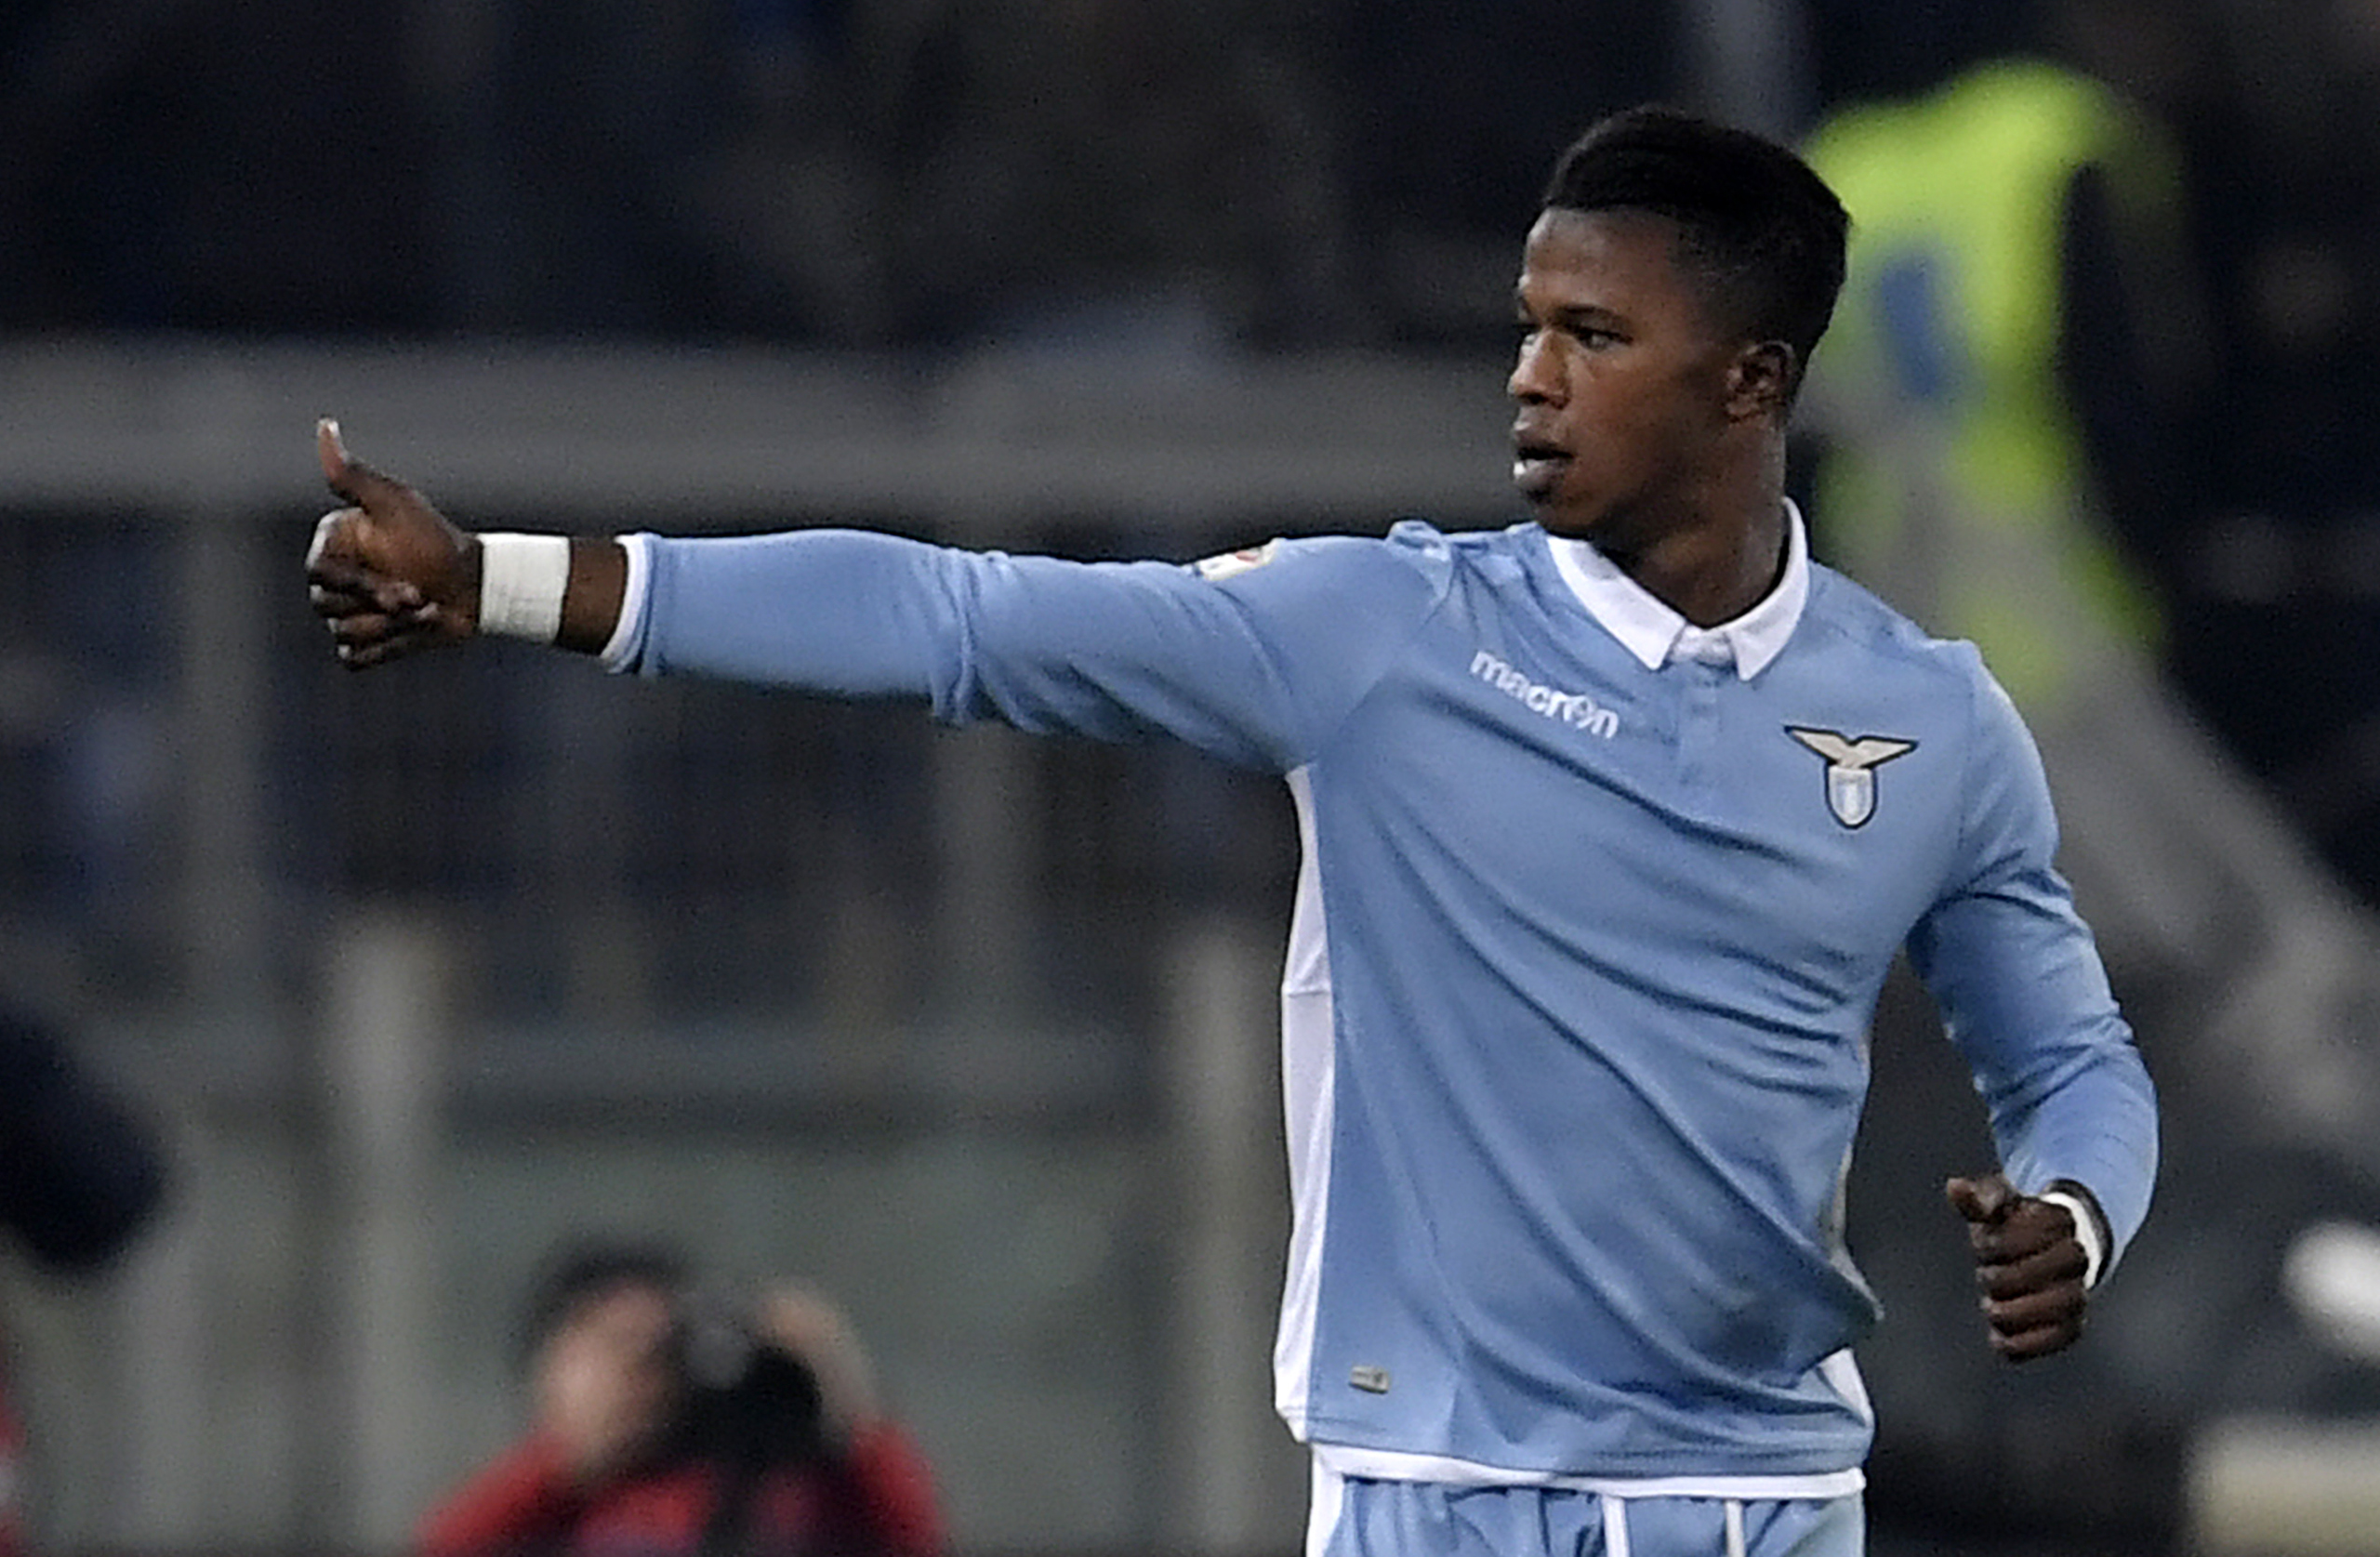 Lazio's Senegalese forward Balde Diao Keita celebrates after scoring a goal during the Serie A football match between Lazio and Fiorentina at Olympic Stadium in Rome on December 18, 2016.  / AFP / TIZIANA FABI        (Photo credit should read TIZIANA FABI/AFP/Getty Images)